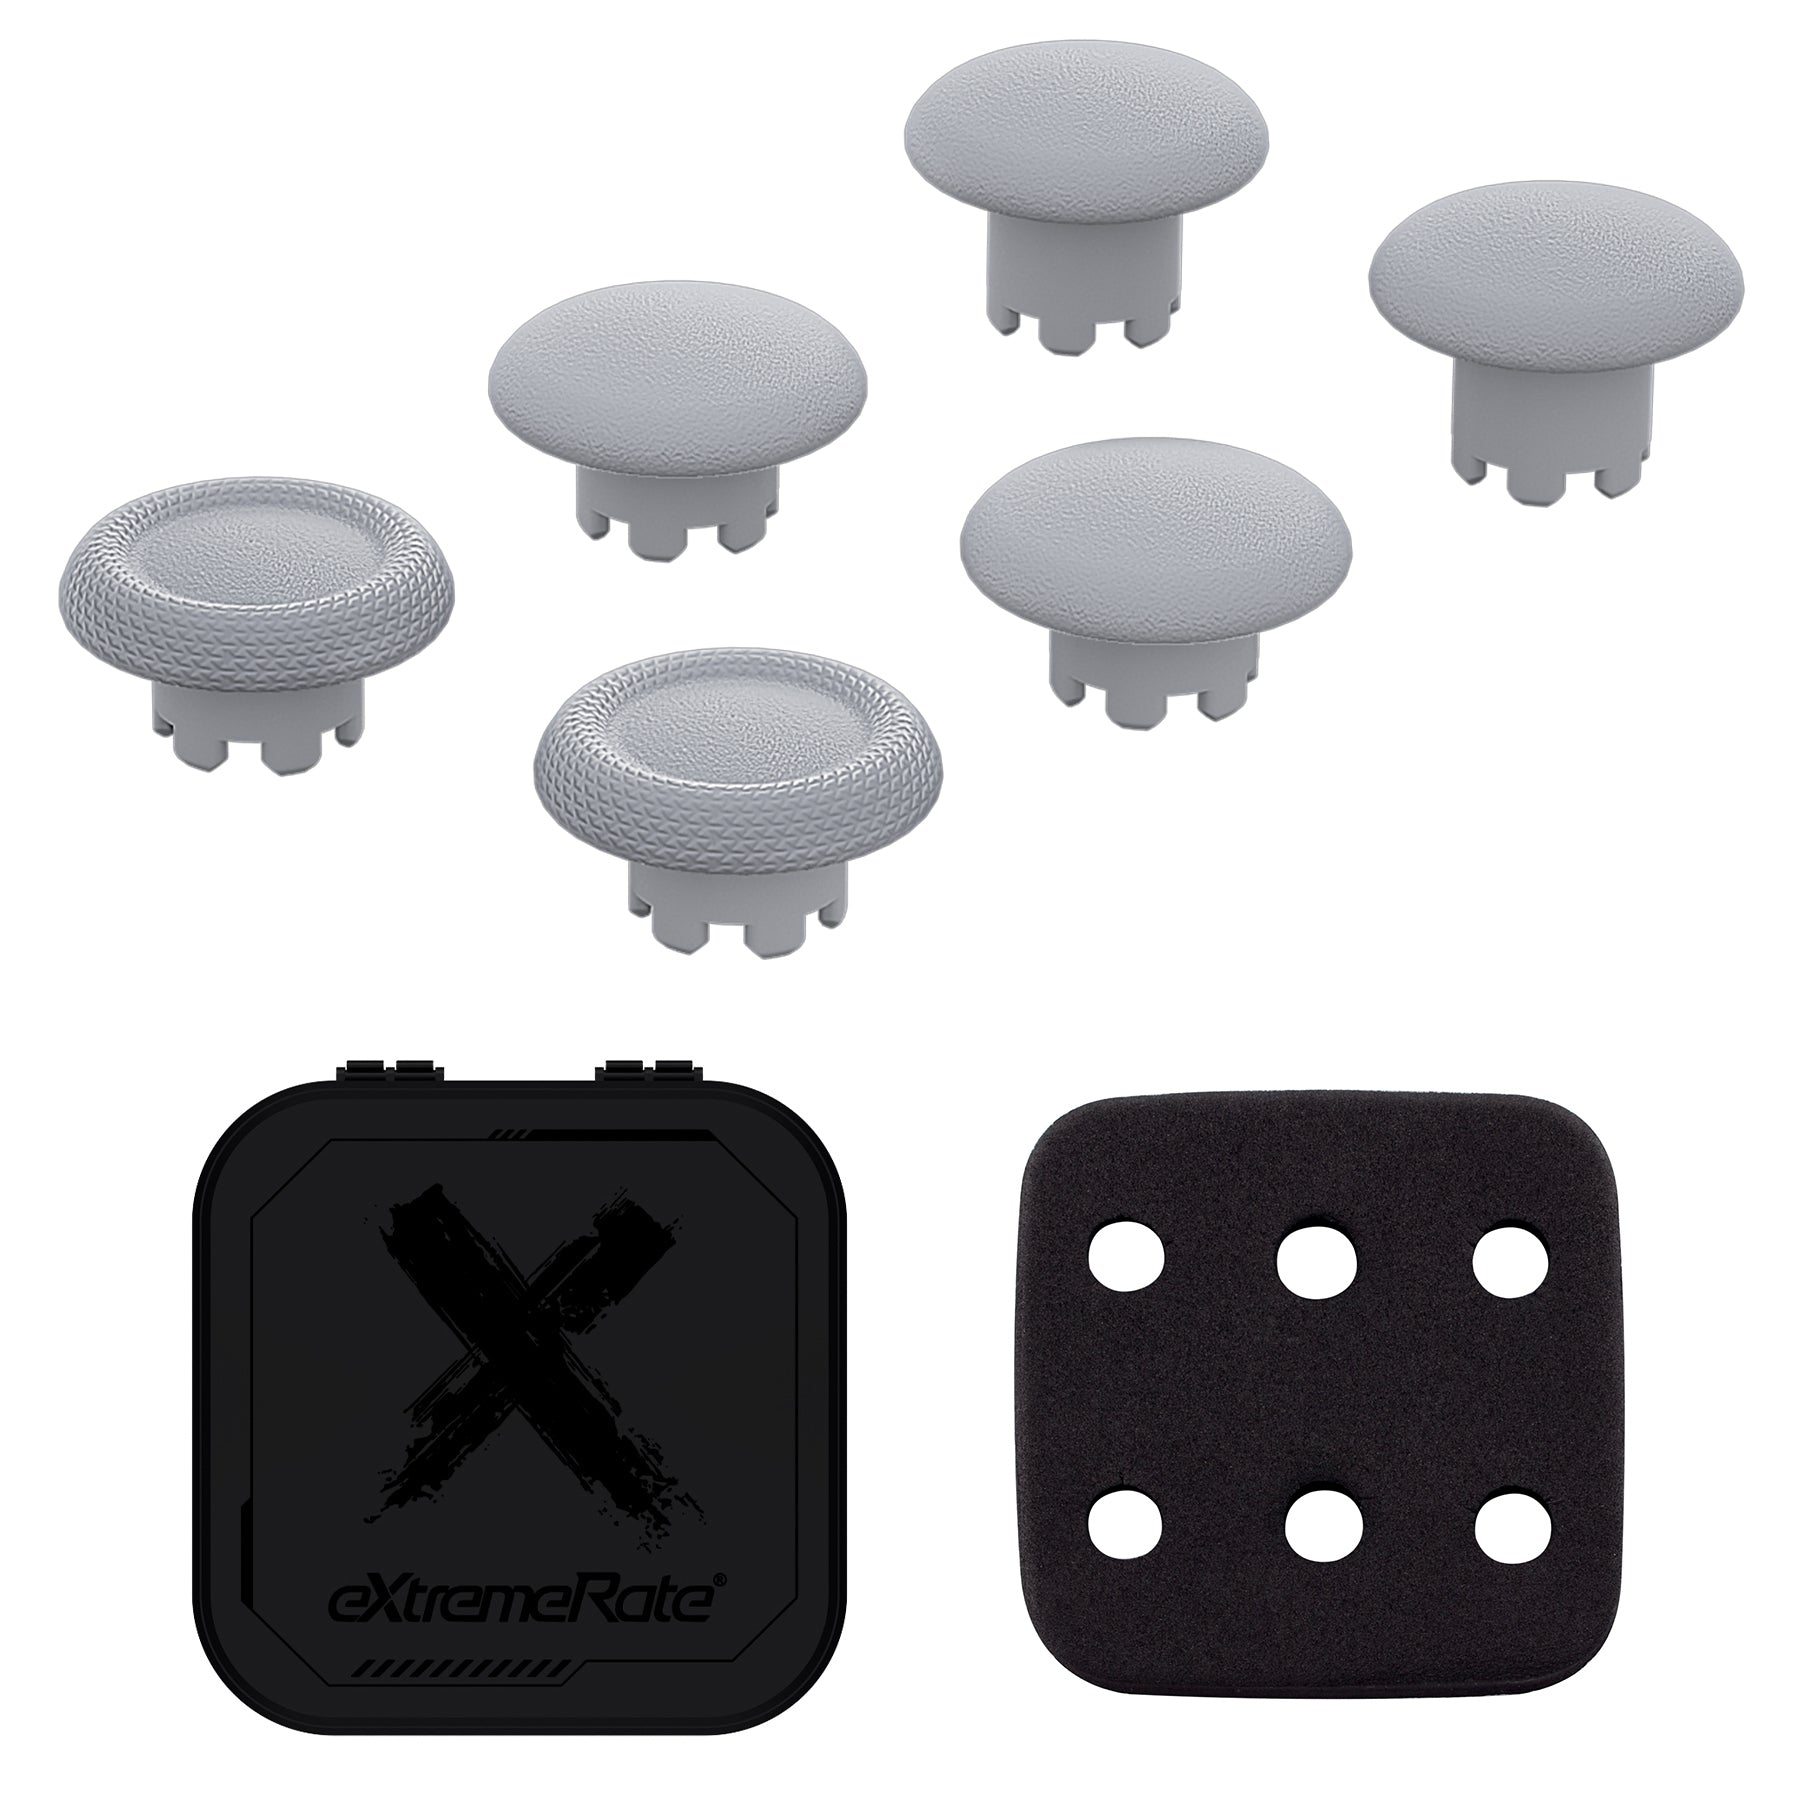 eXtremeRate Replacement Swappable Thumbsticks for PS5 Edge Controller - New Hope Gray eXtremeRate